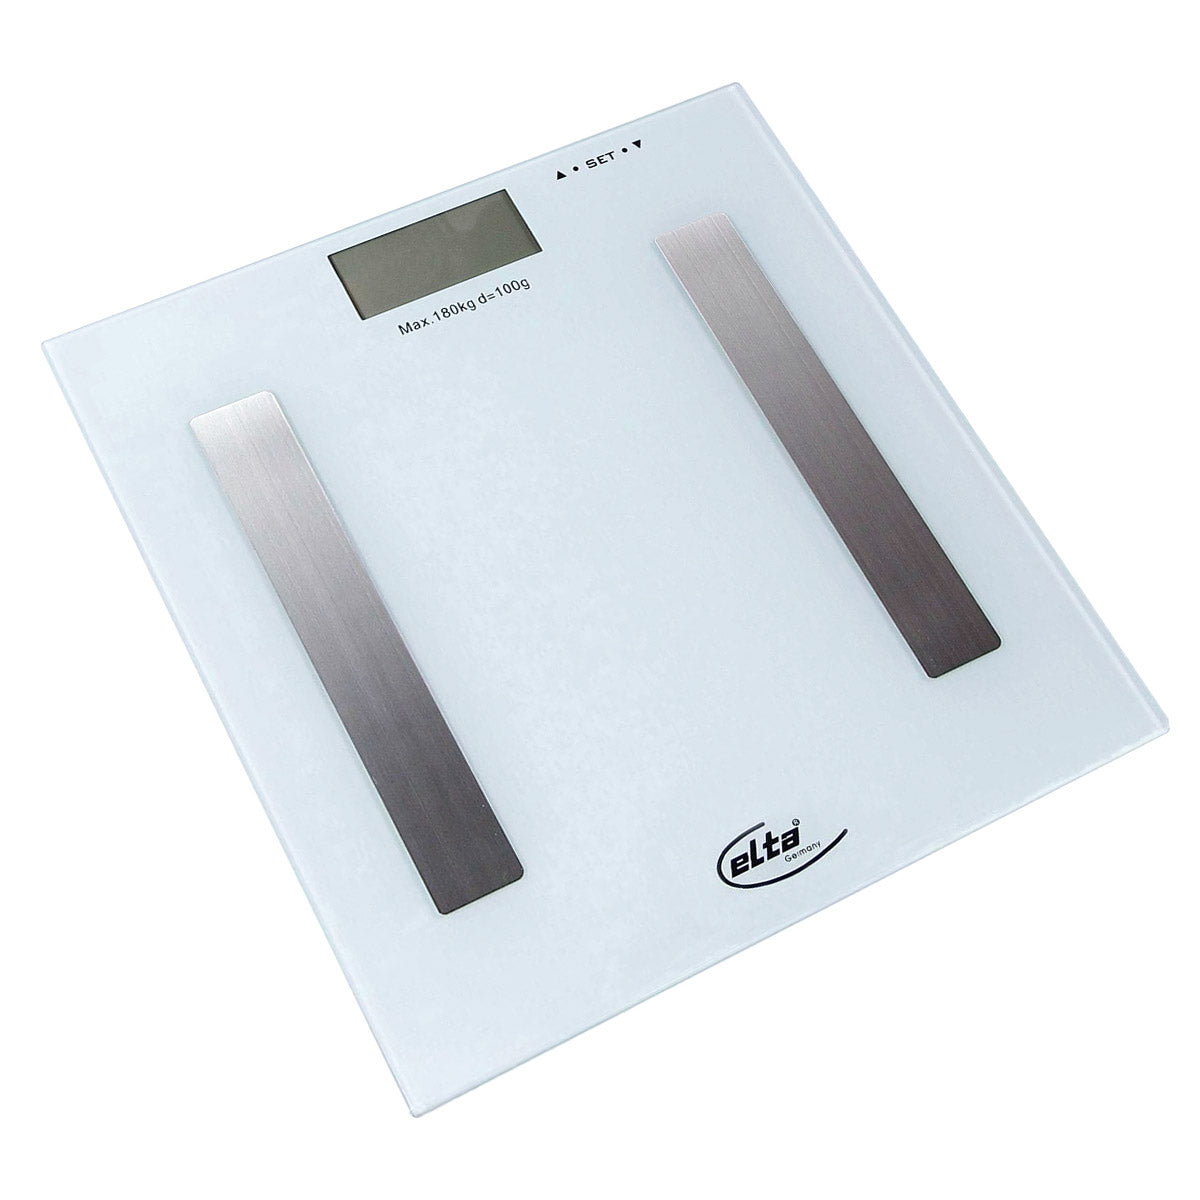 <tc>Ariko</tc> Elta Digital Body - Fit Scale - Personal Scale - Analysis Scale - White - Gray - Dimensions 28 x 28 x 2.5 Cm - Maximum 180 KG - Including 2 x AAA batteries